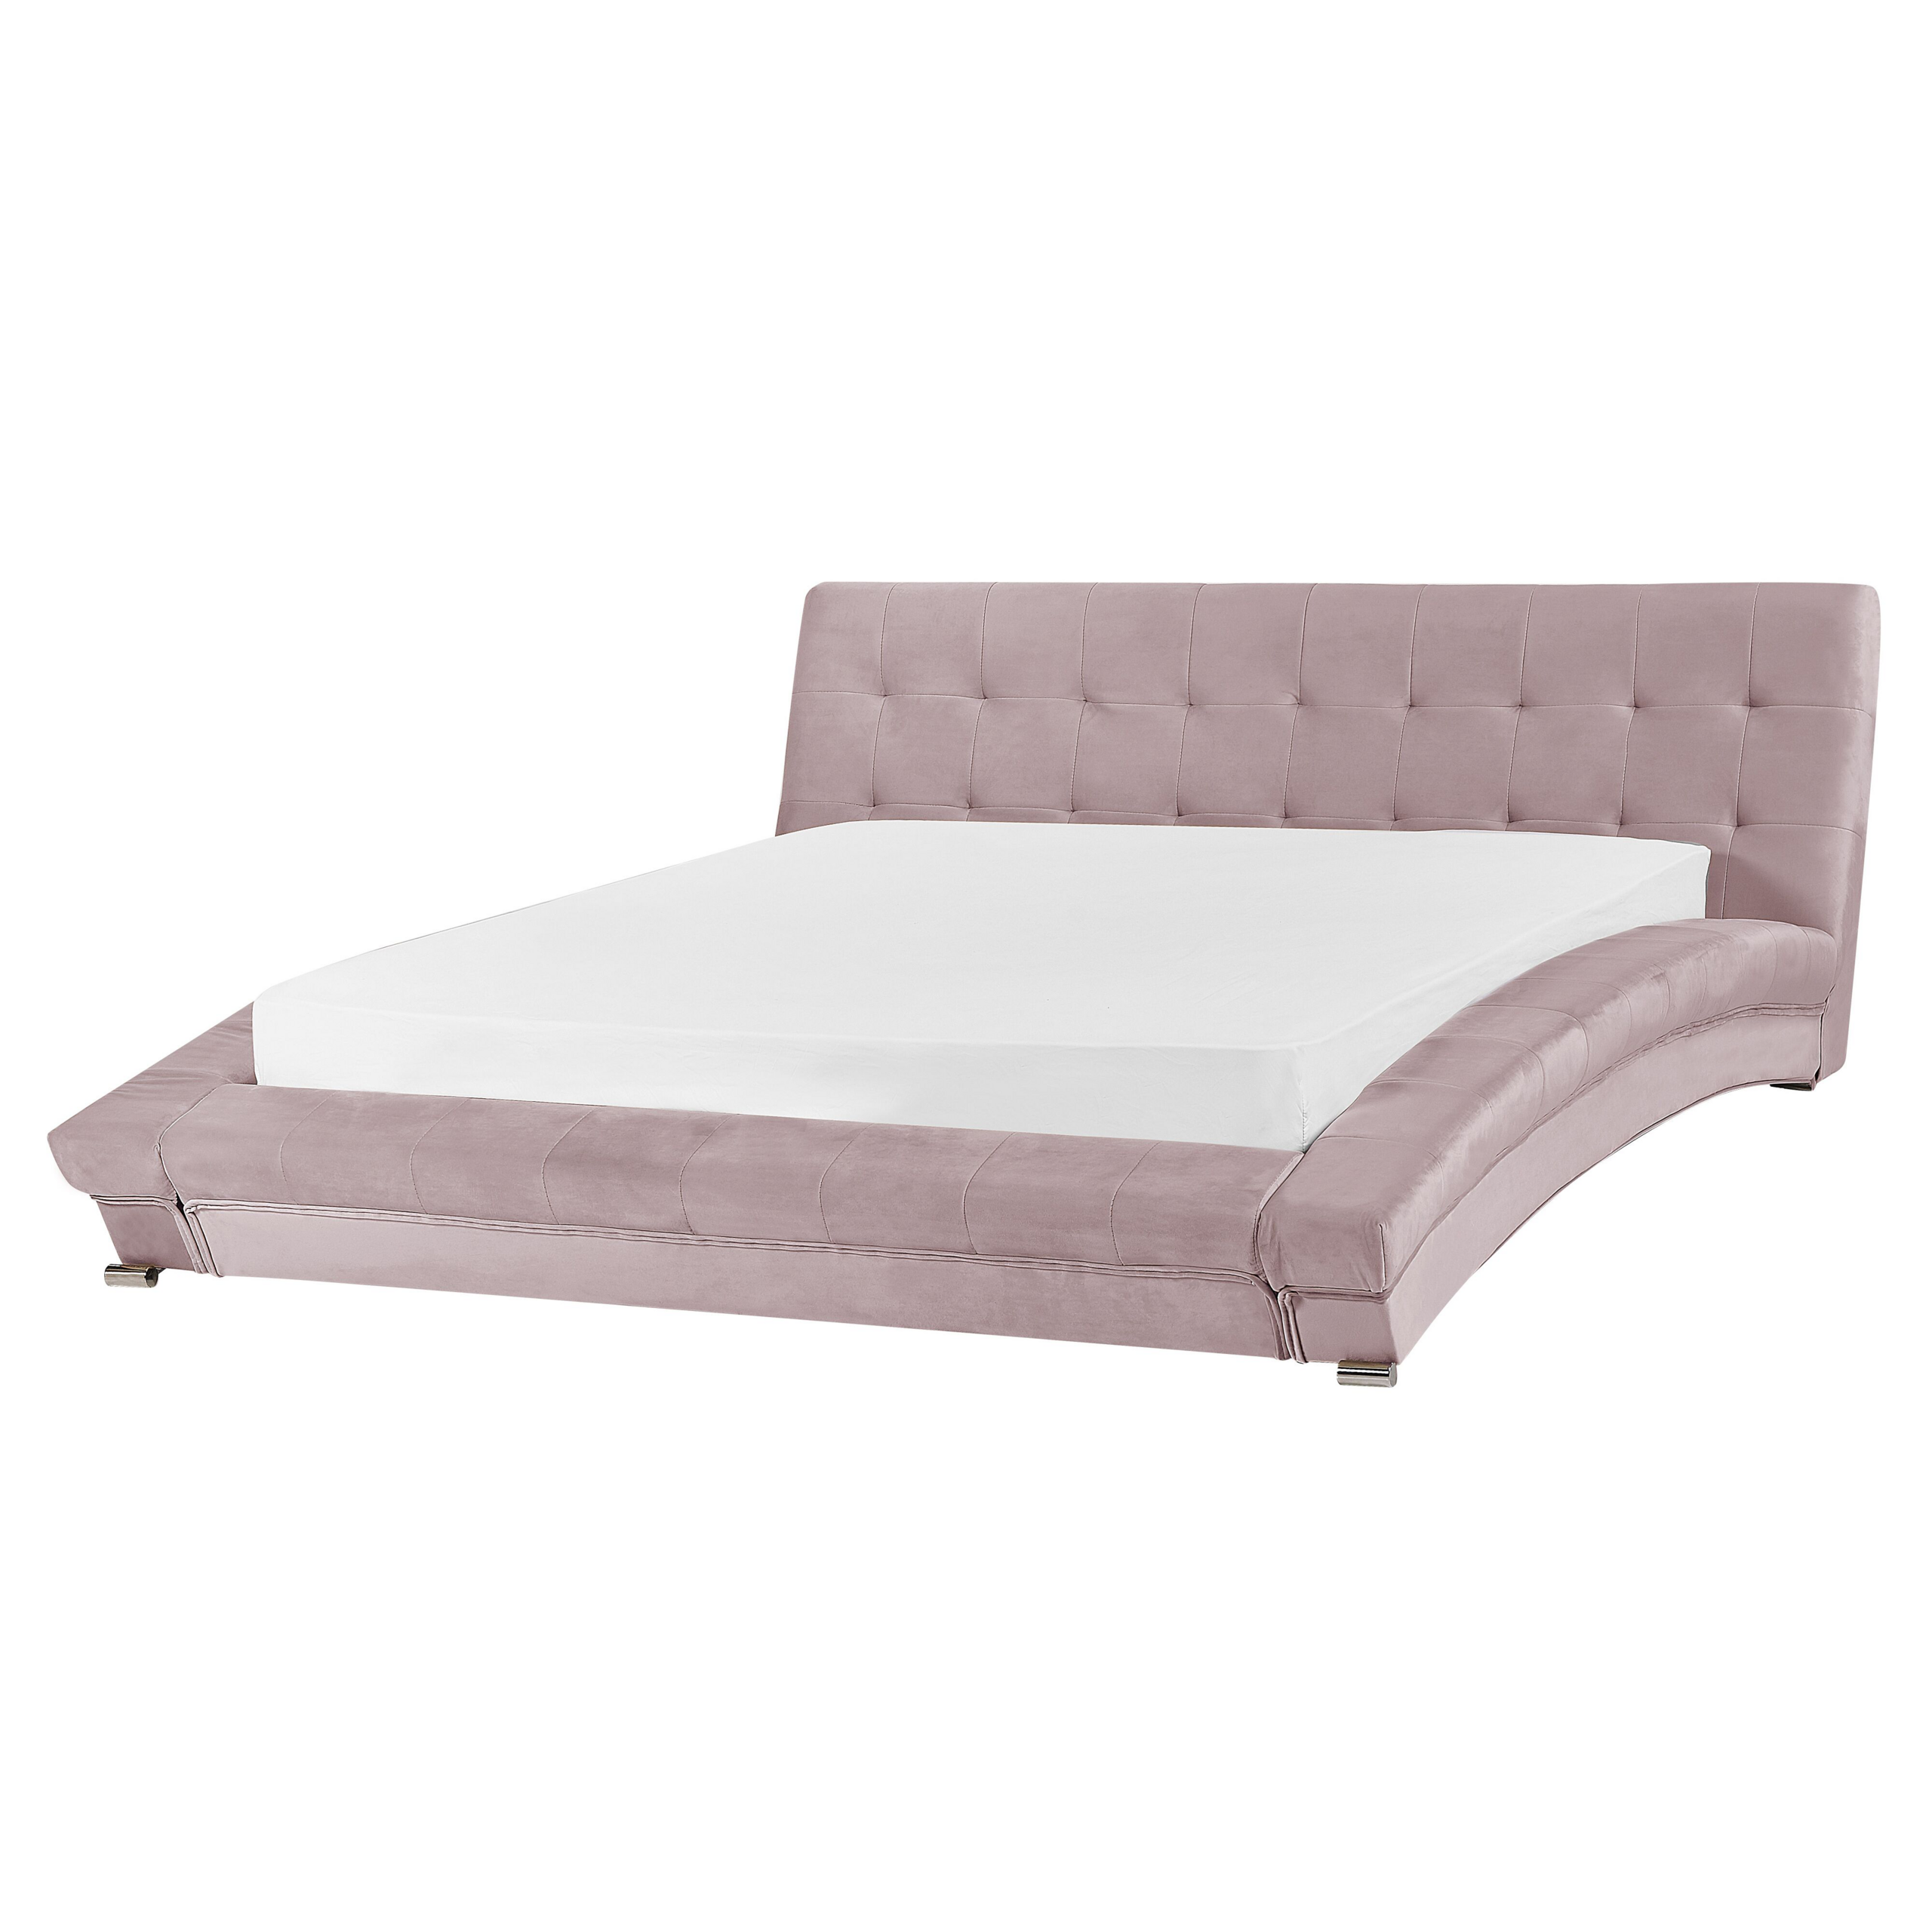 Beliani EU King Size Waterbed 5ft3 Pink Velvet with Accessories Contemporary